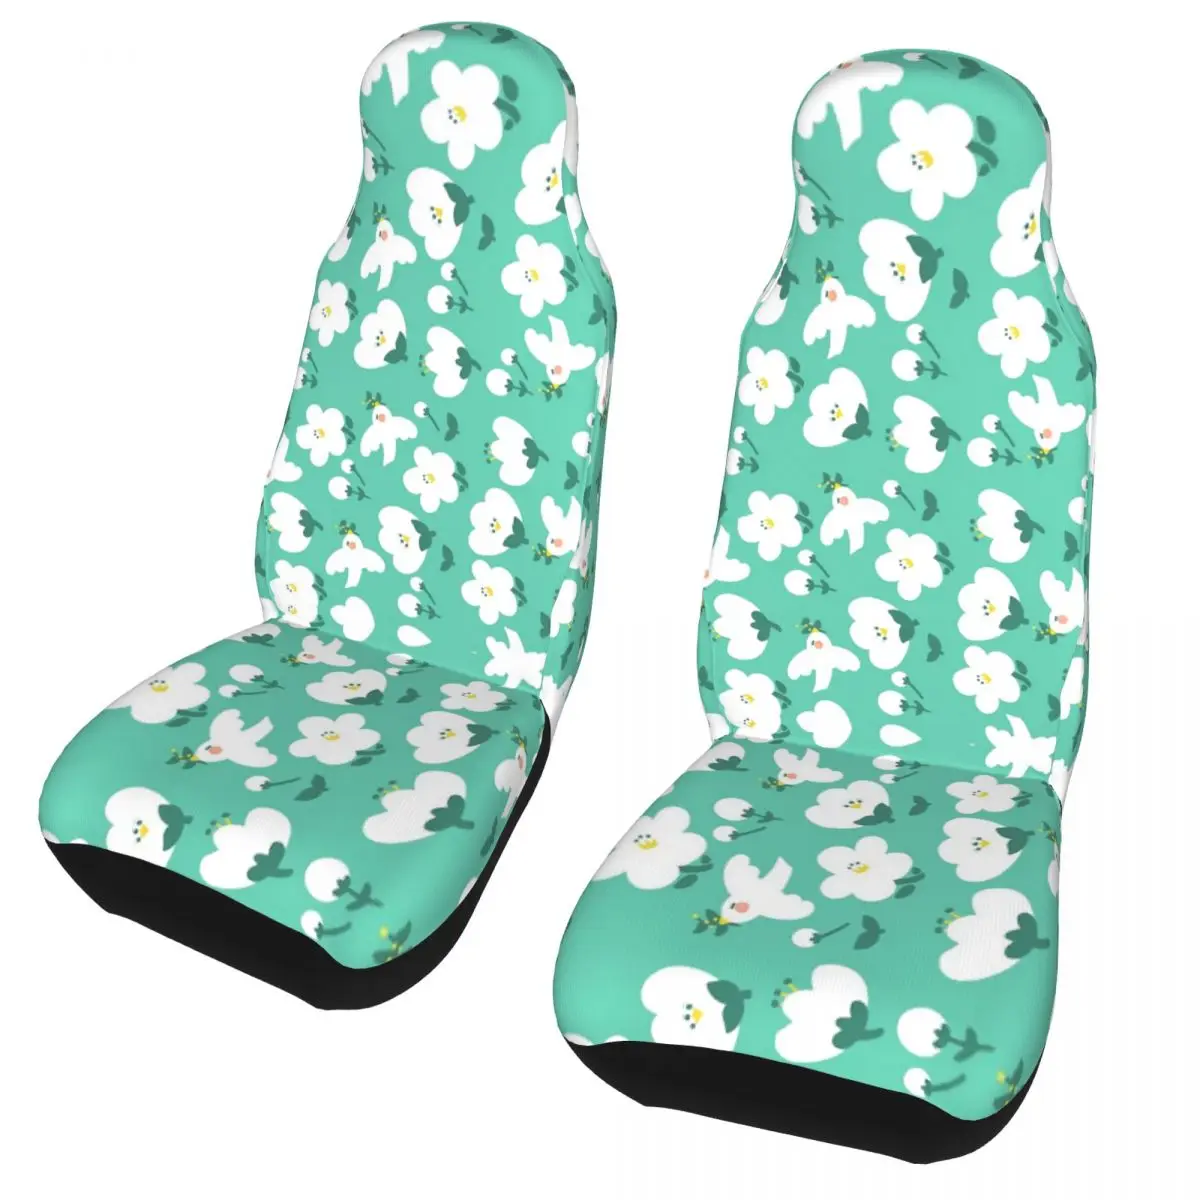 

Bloom Flowers Universal Car Seat Cover Protector Interior Accessories For All Kinds Models Car Seat Covers Fabric Hunting